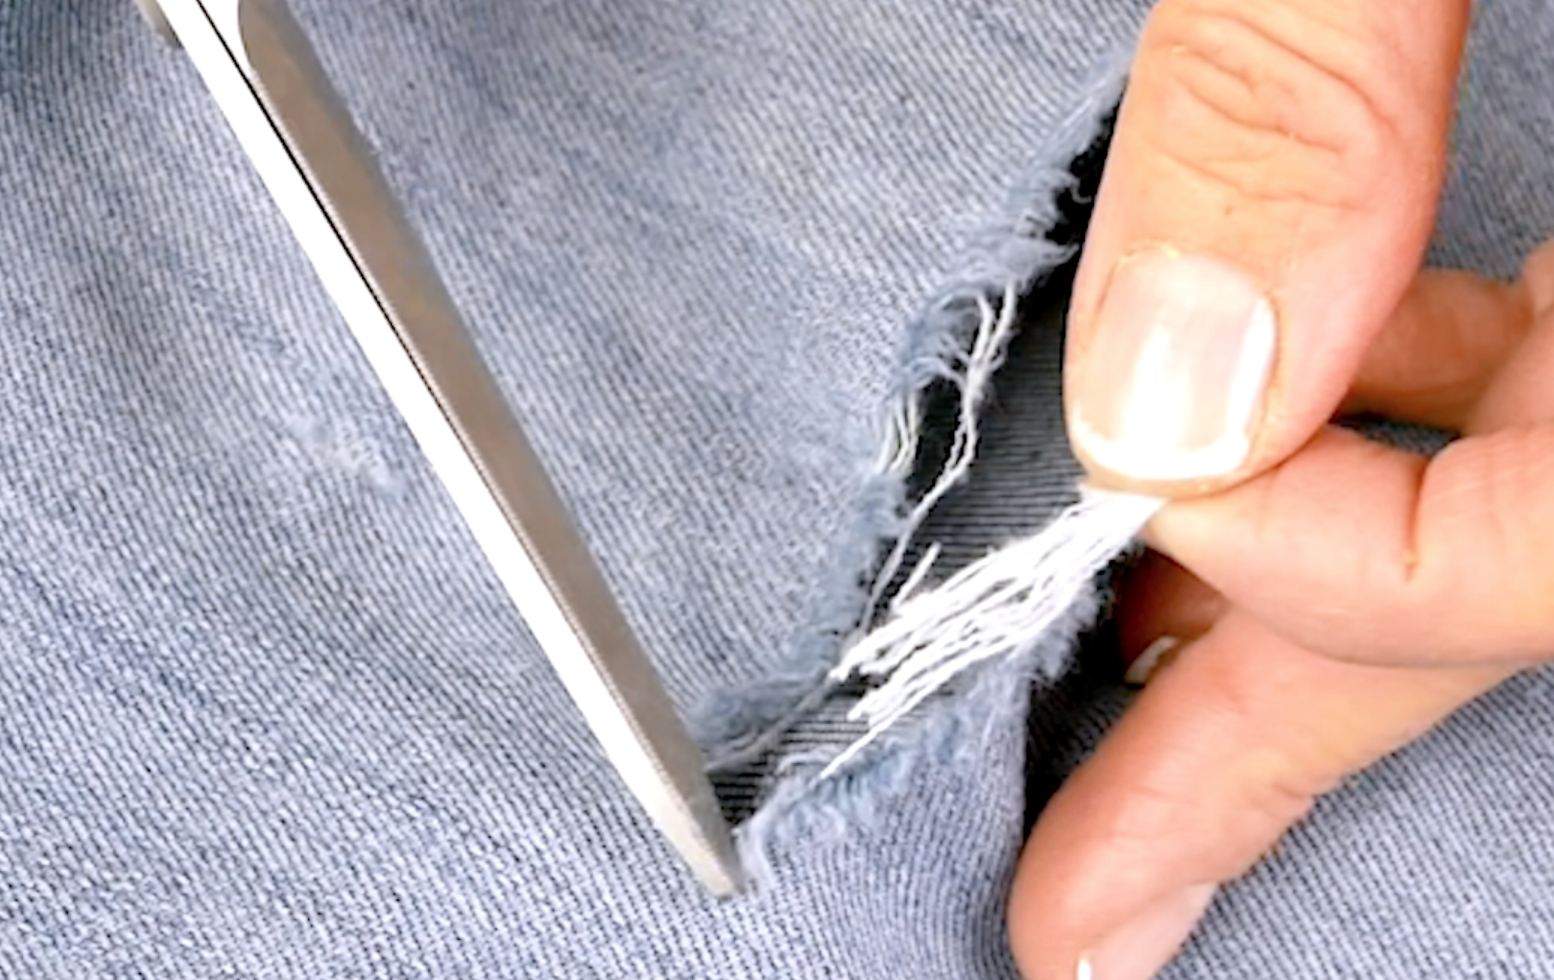 Making No-Sew Leather Patch to repair Jeans with hole (Free PDF